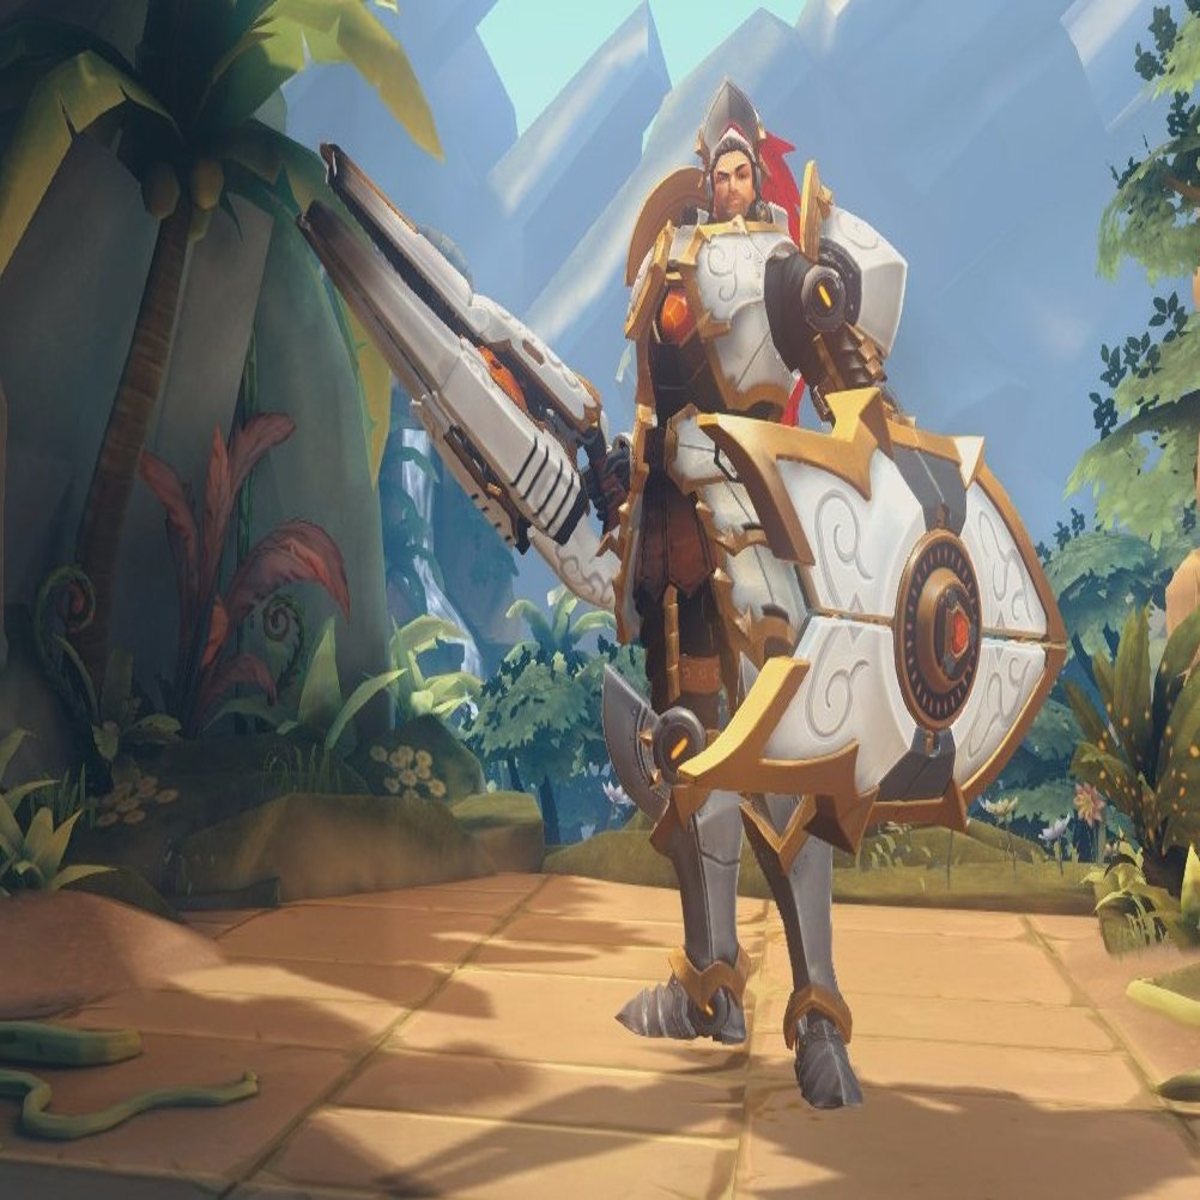 The Overwatch clone Paladins has already reached 4 million players